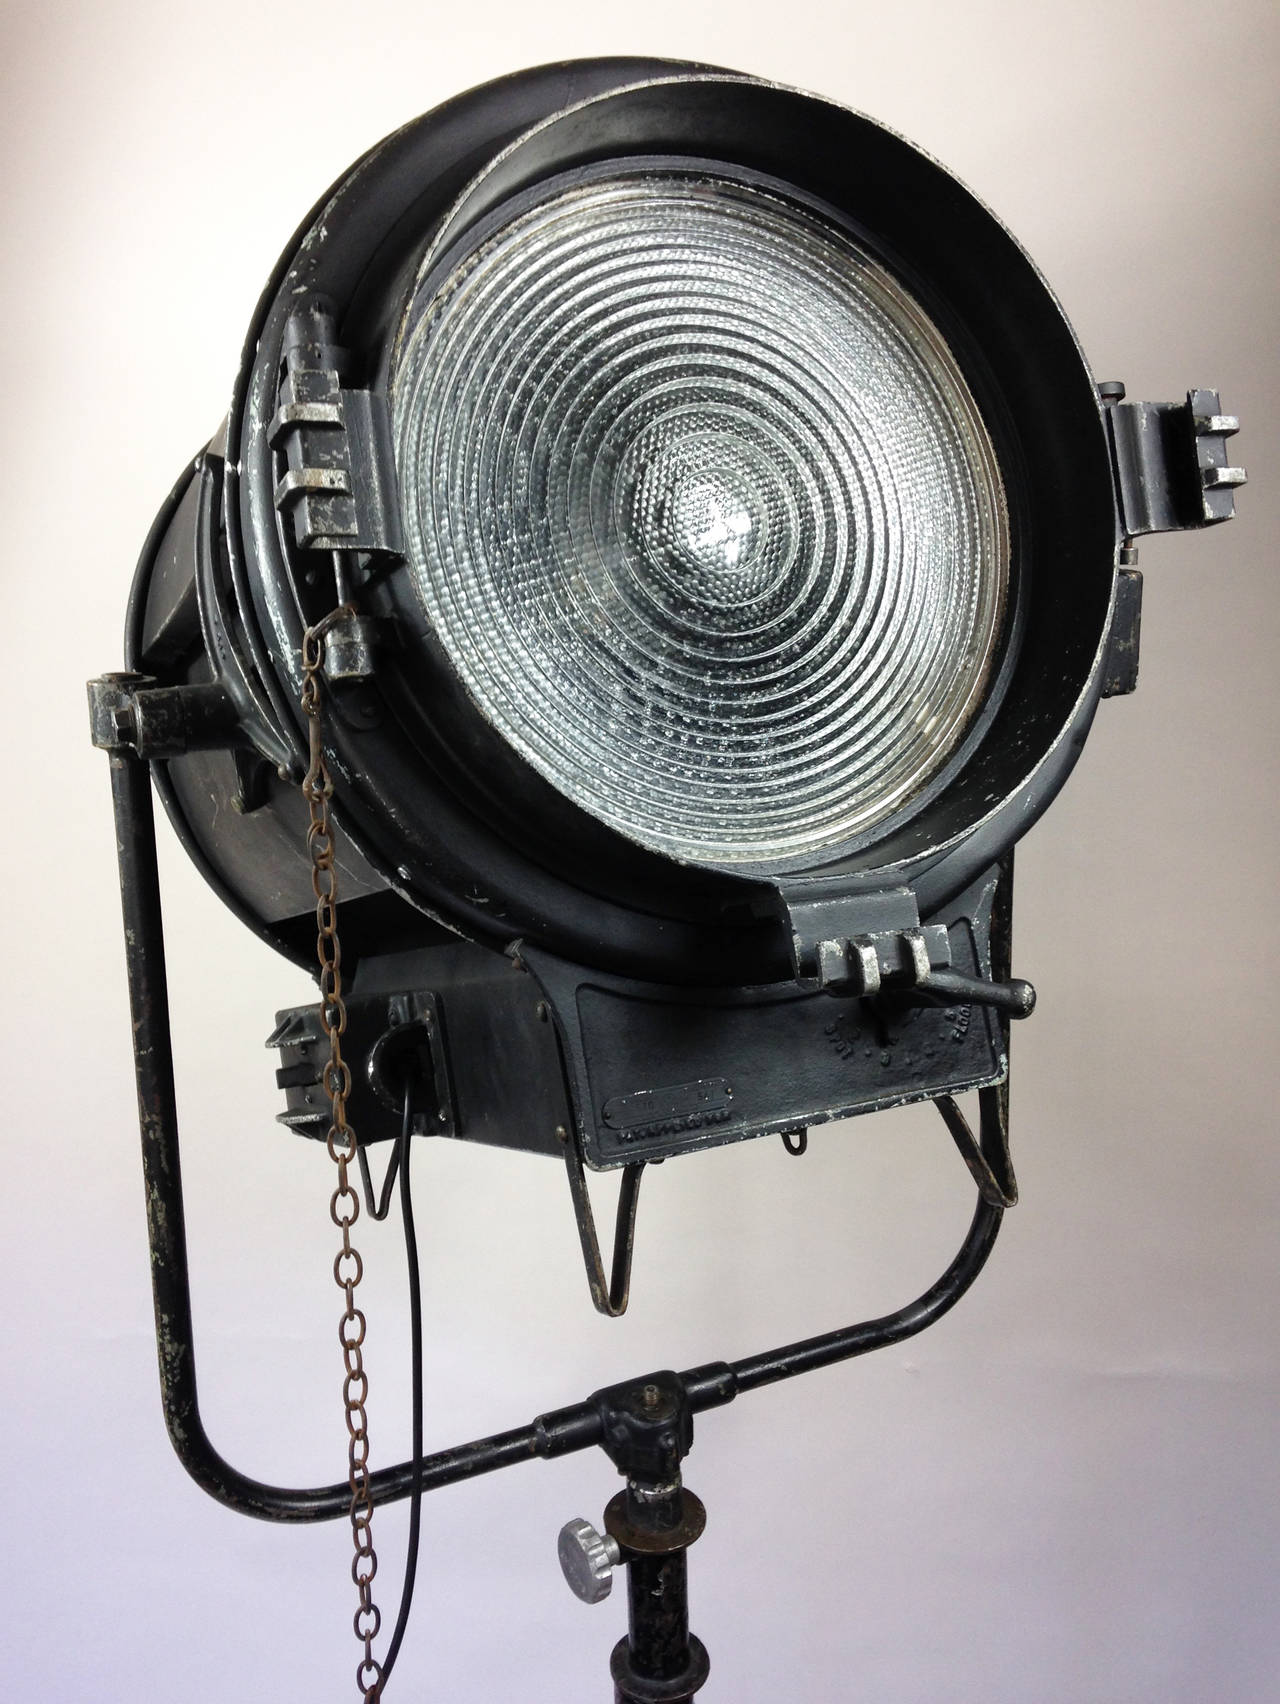 An extremely large mid-20th century theatre or studio light by Mole Richardson (England) Ltd.

Unlike most on the market today, this example is in its original, unrestored condition, although it has been wired for UK mains electricity. The lamp is